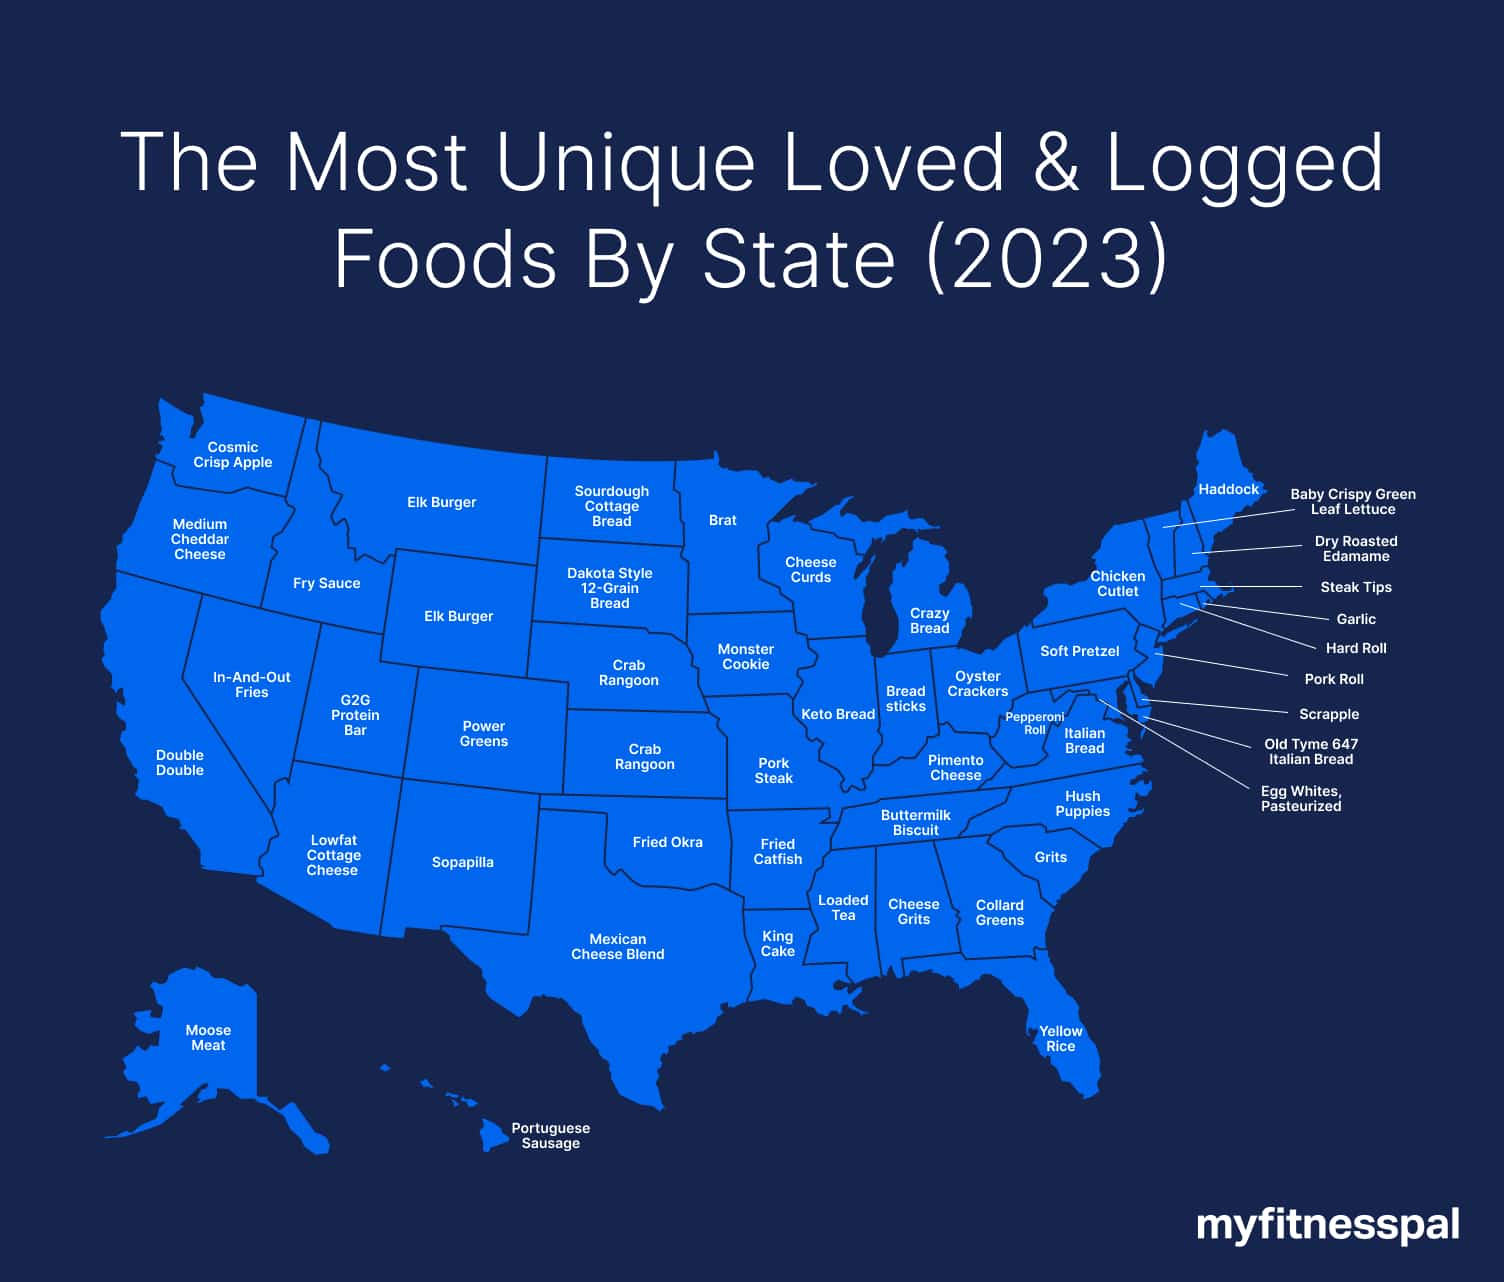 The Most Unique Loved and Logged Foods In Every State (2023)